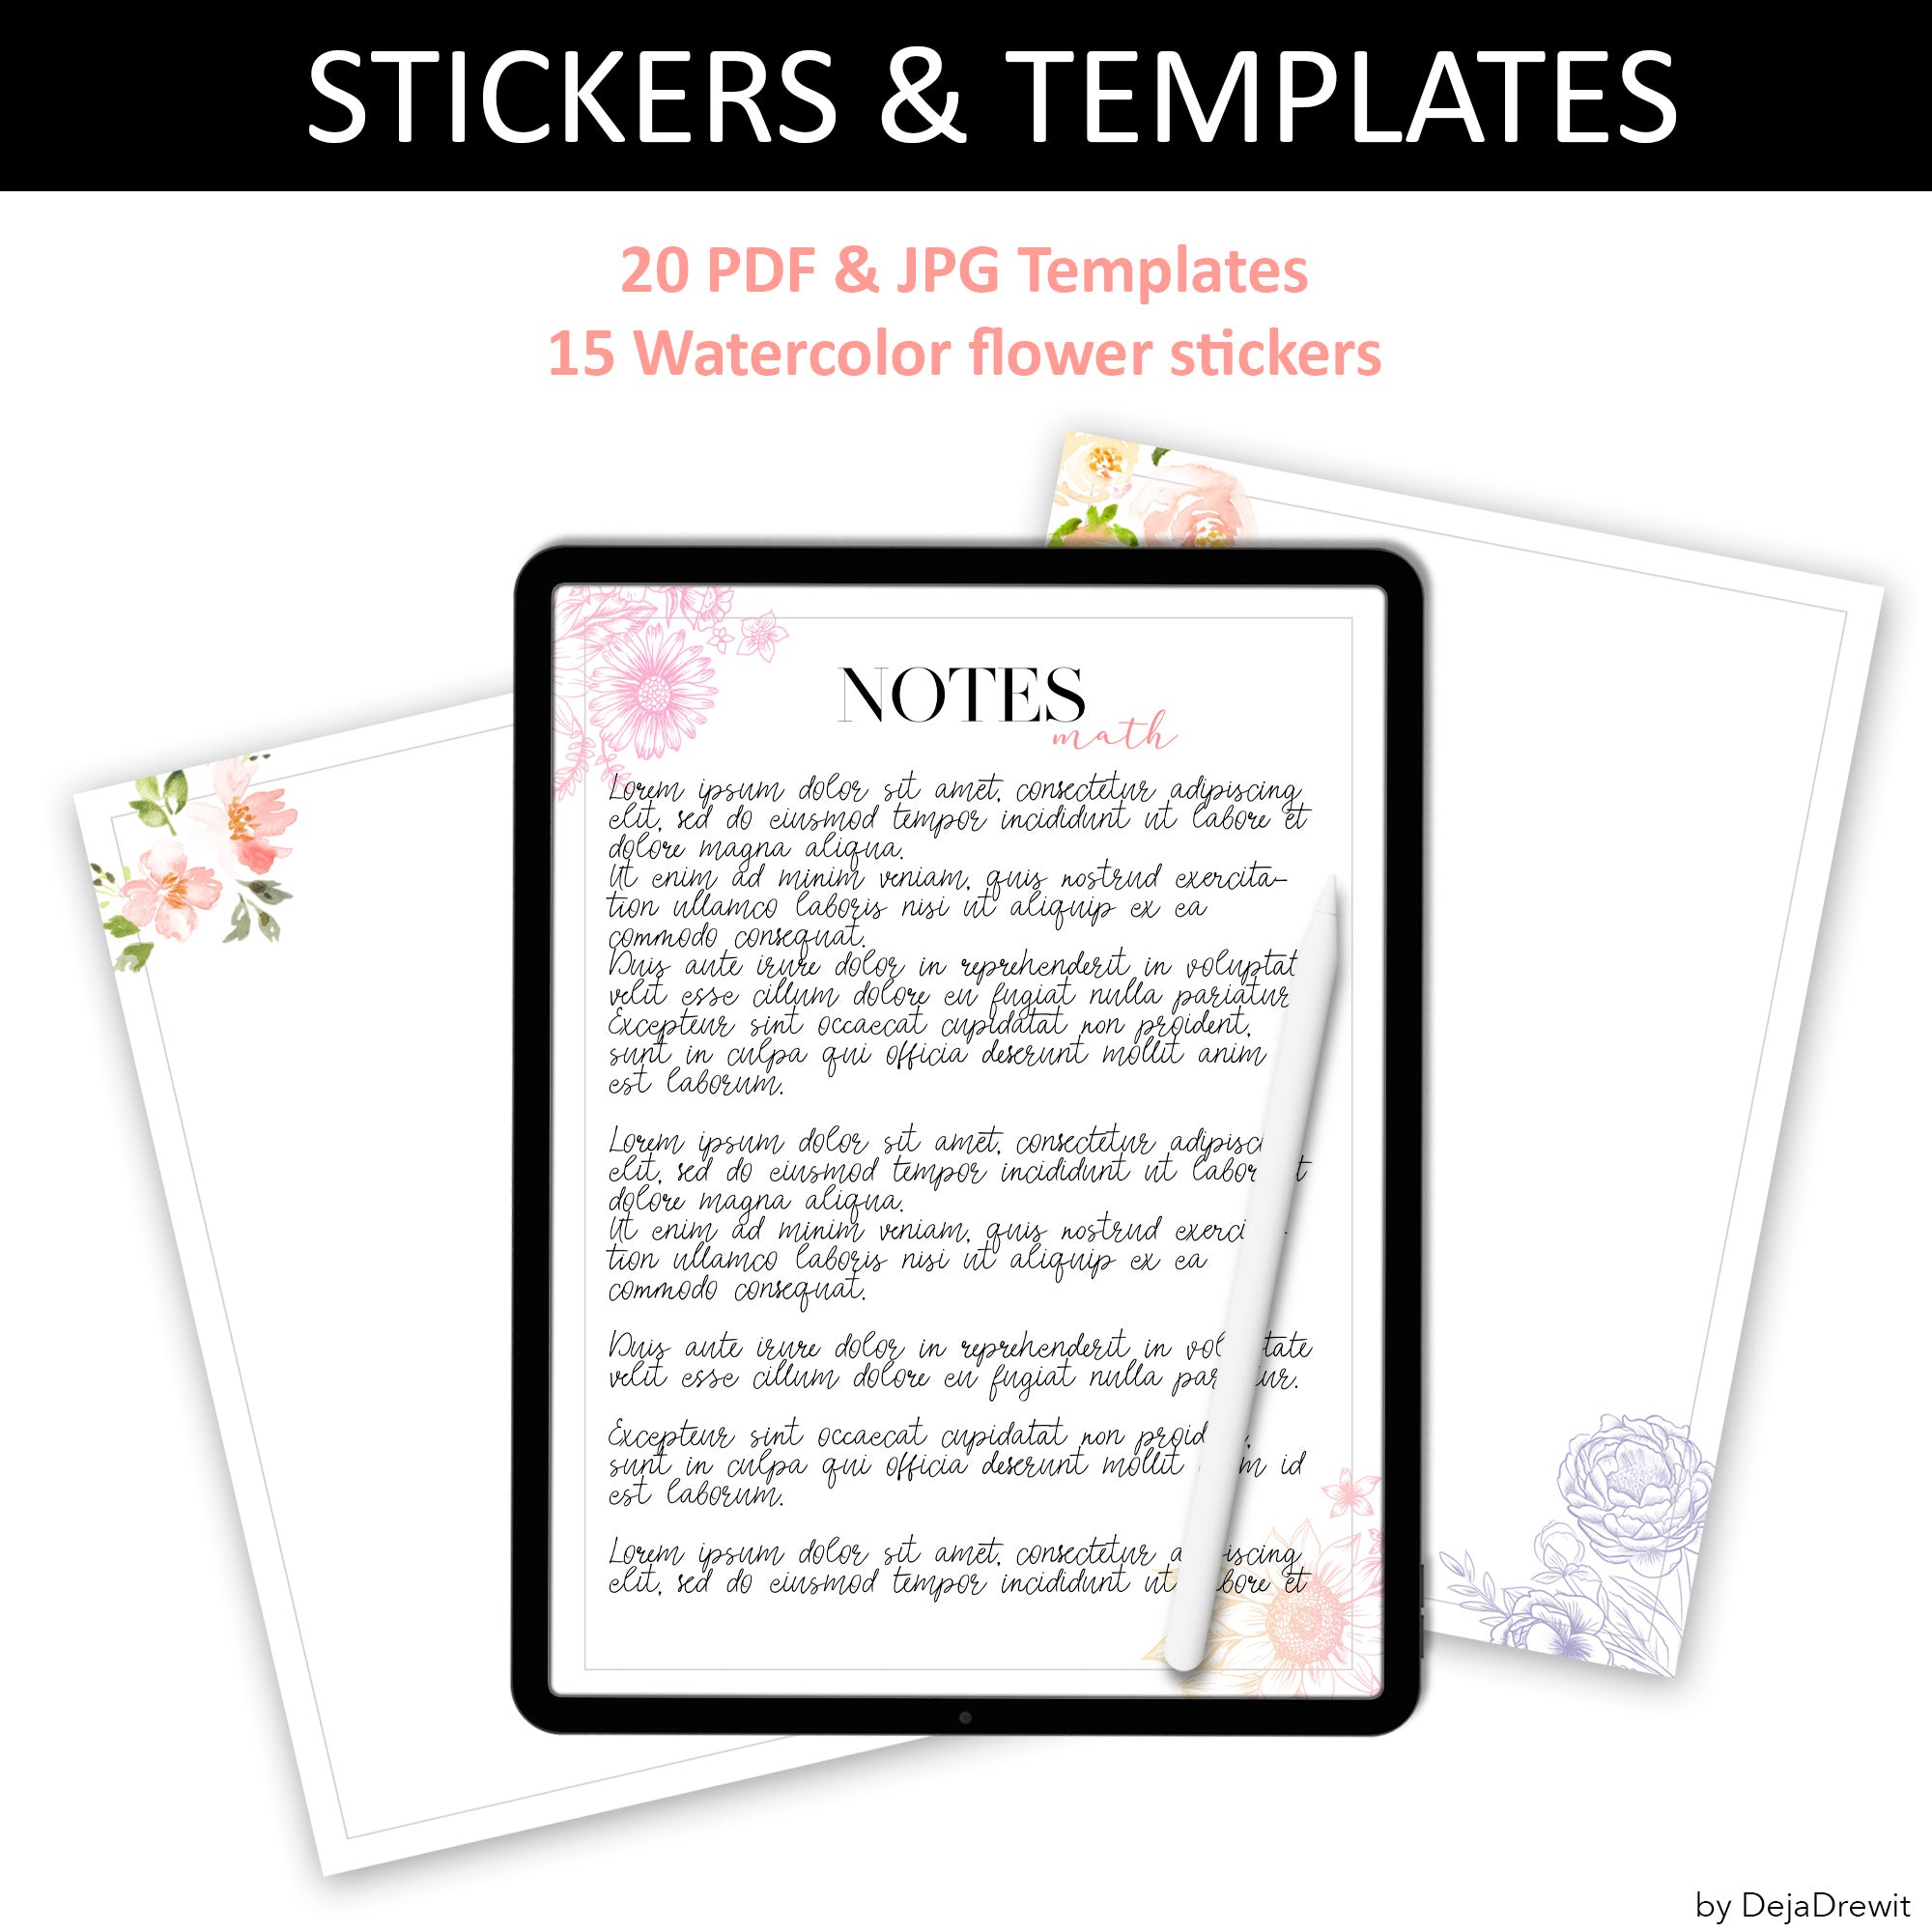 Watercolor flower stickers! Swipe to see them all : r/notabilityapp